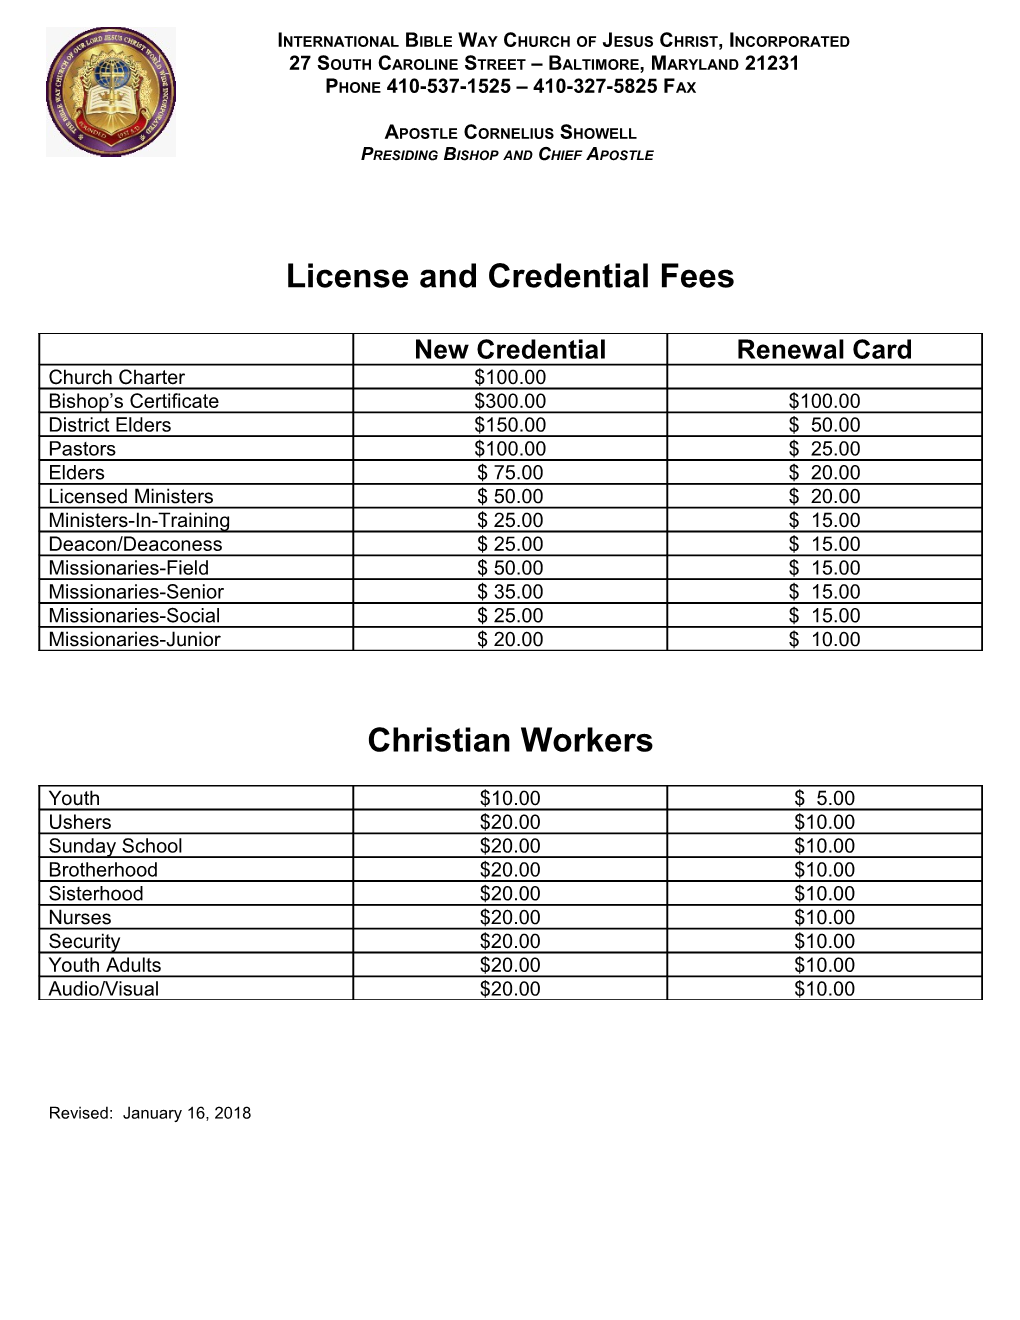 License and Credential Fees